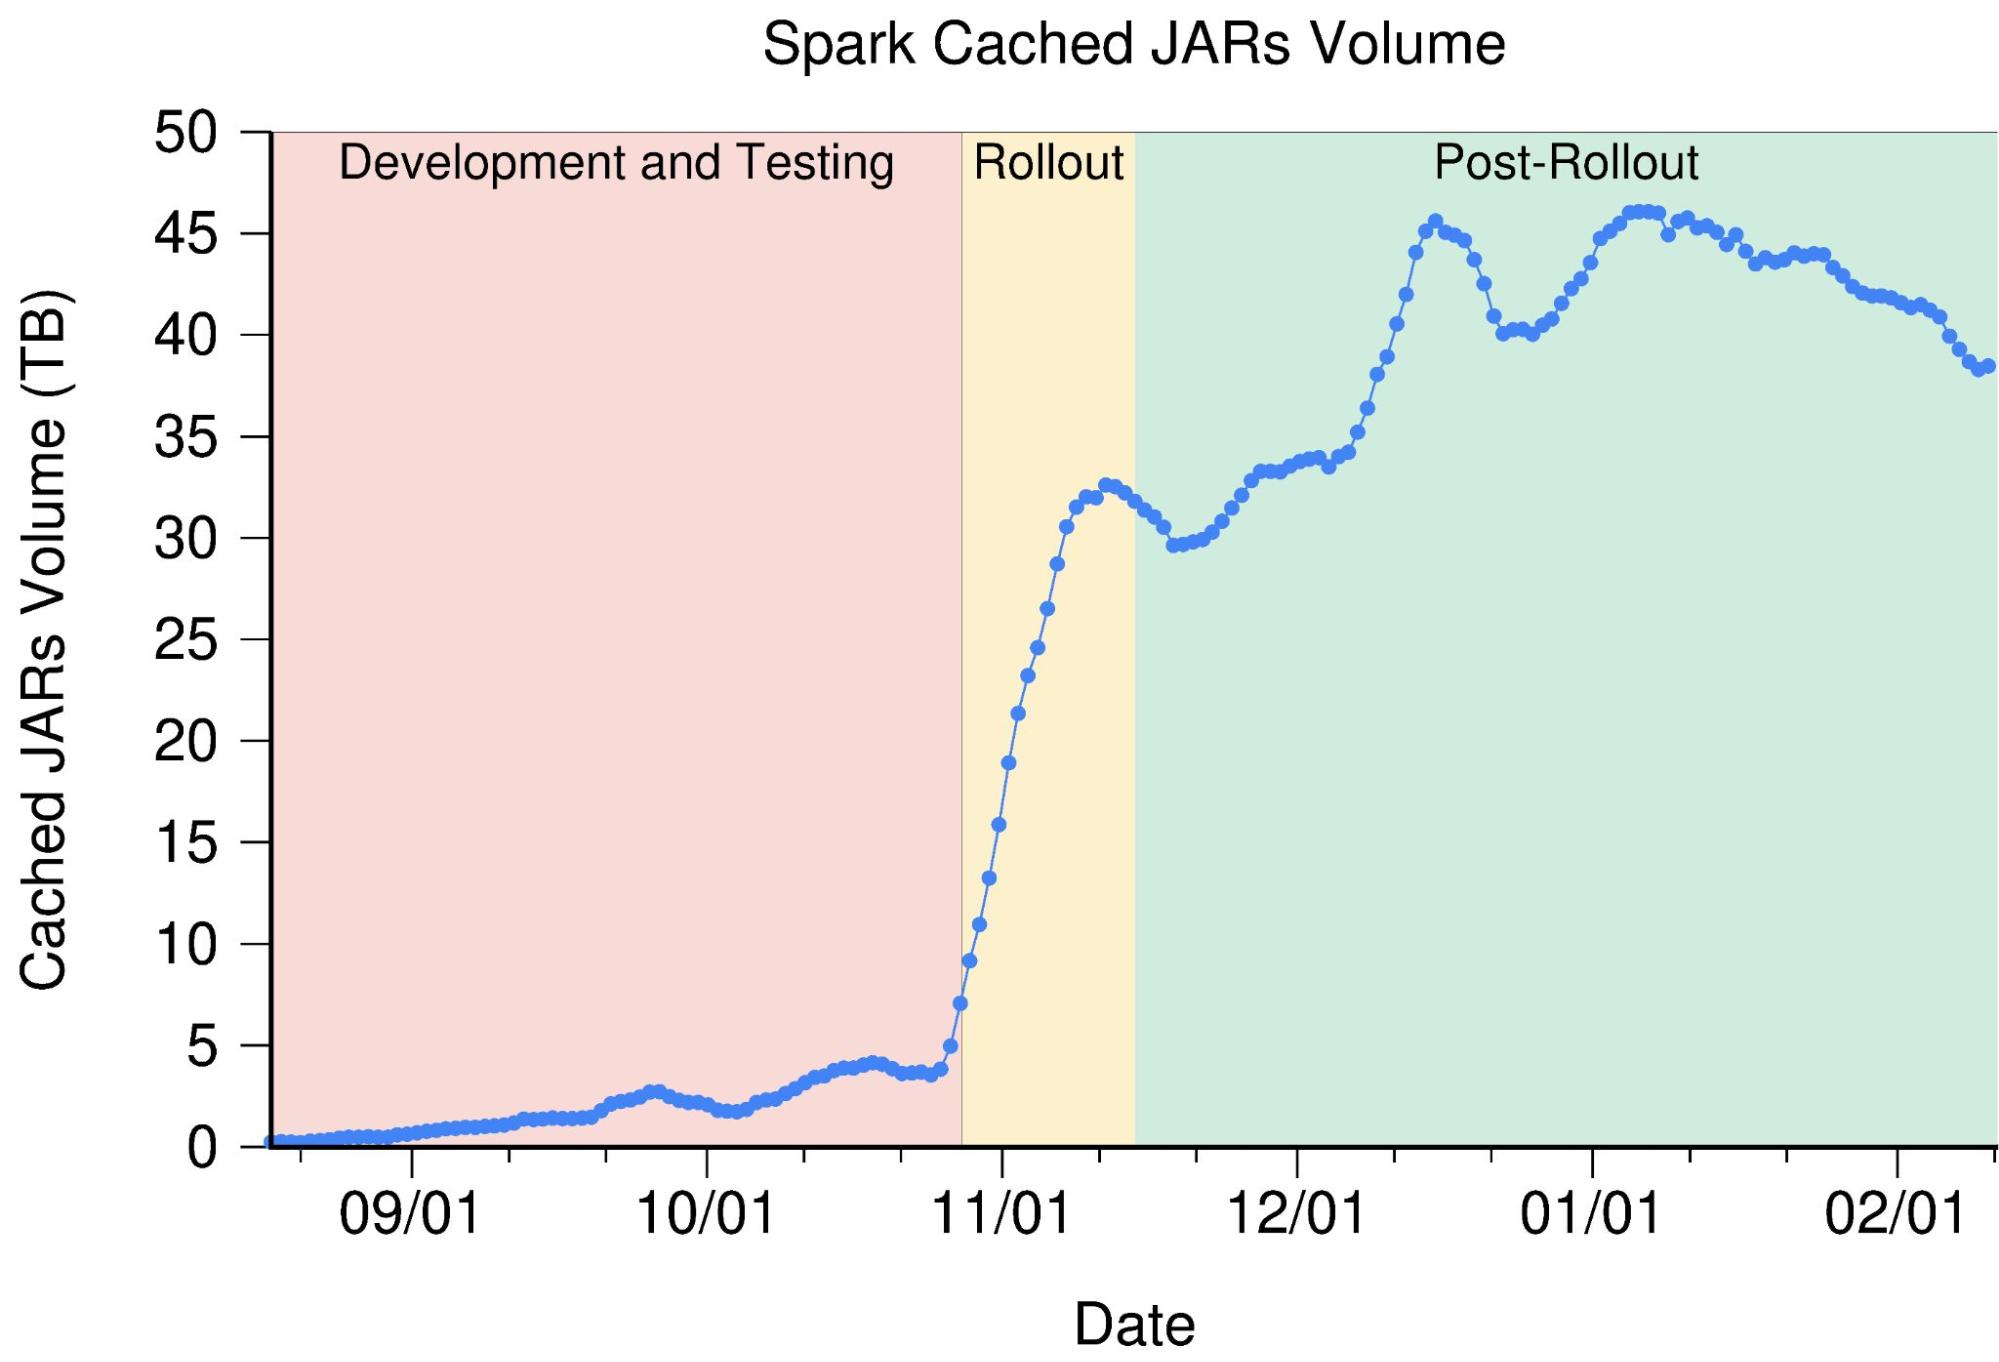 Graphic that shows the Spark cached JARs volume over time